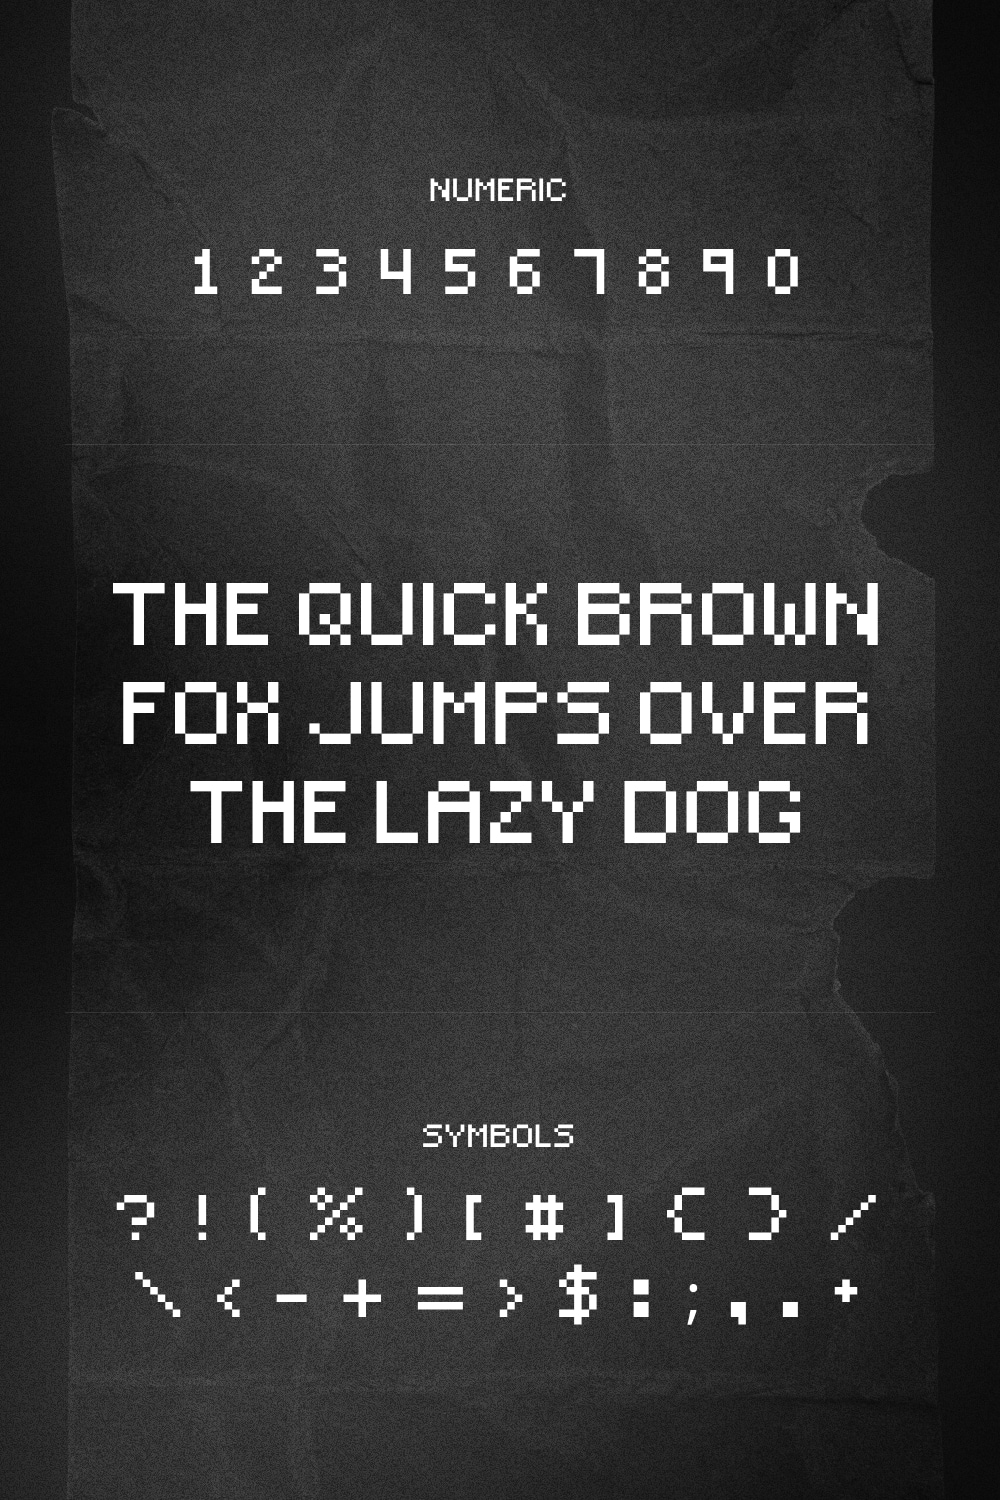 Pixel font for a special project.